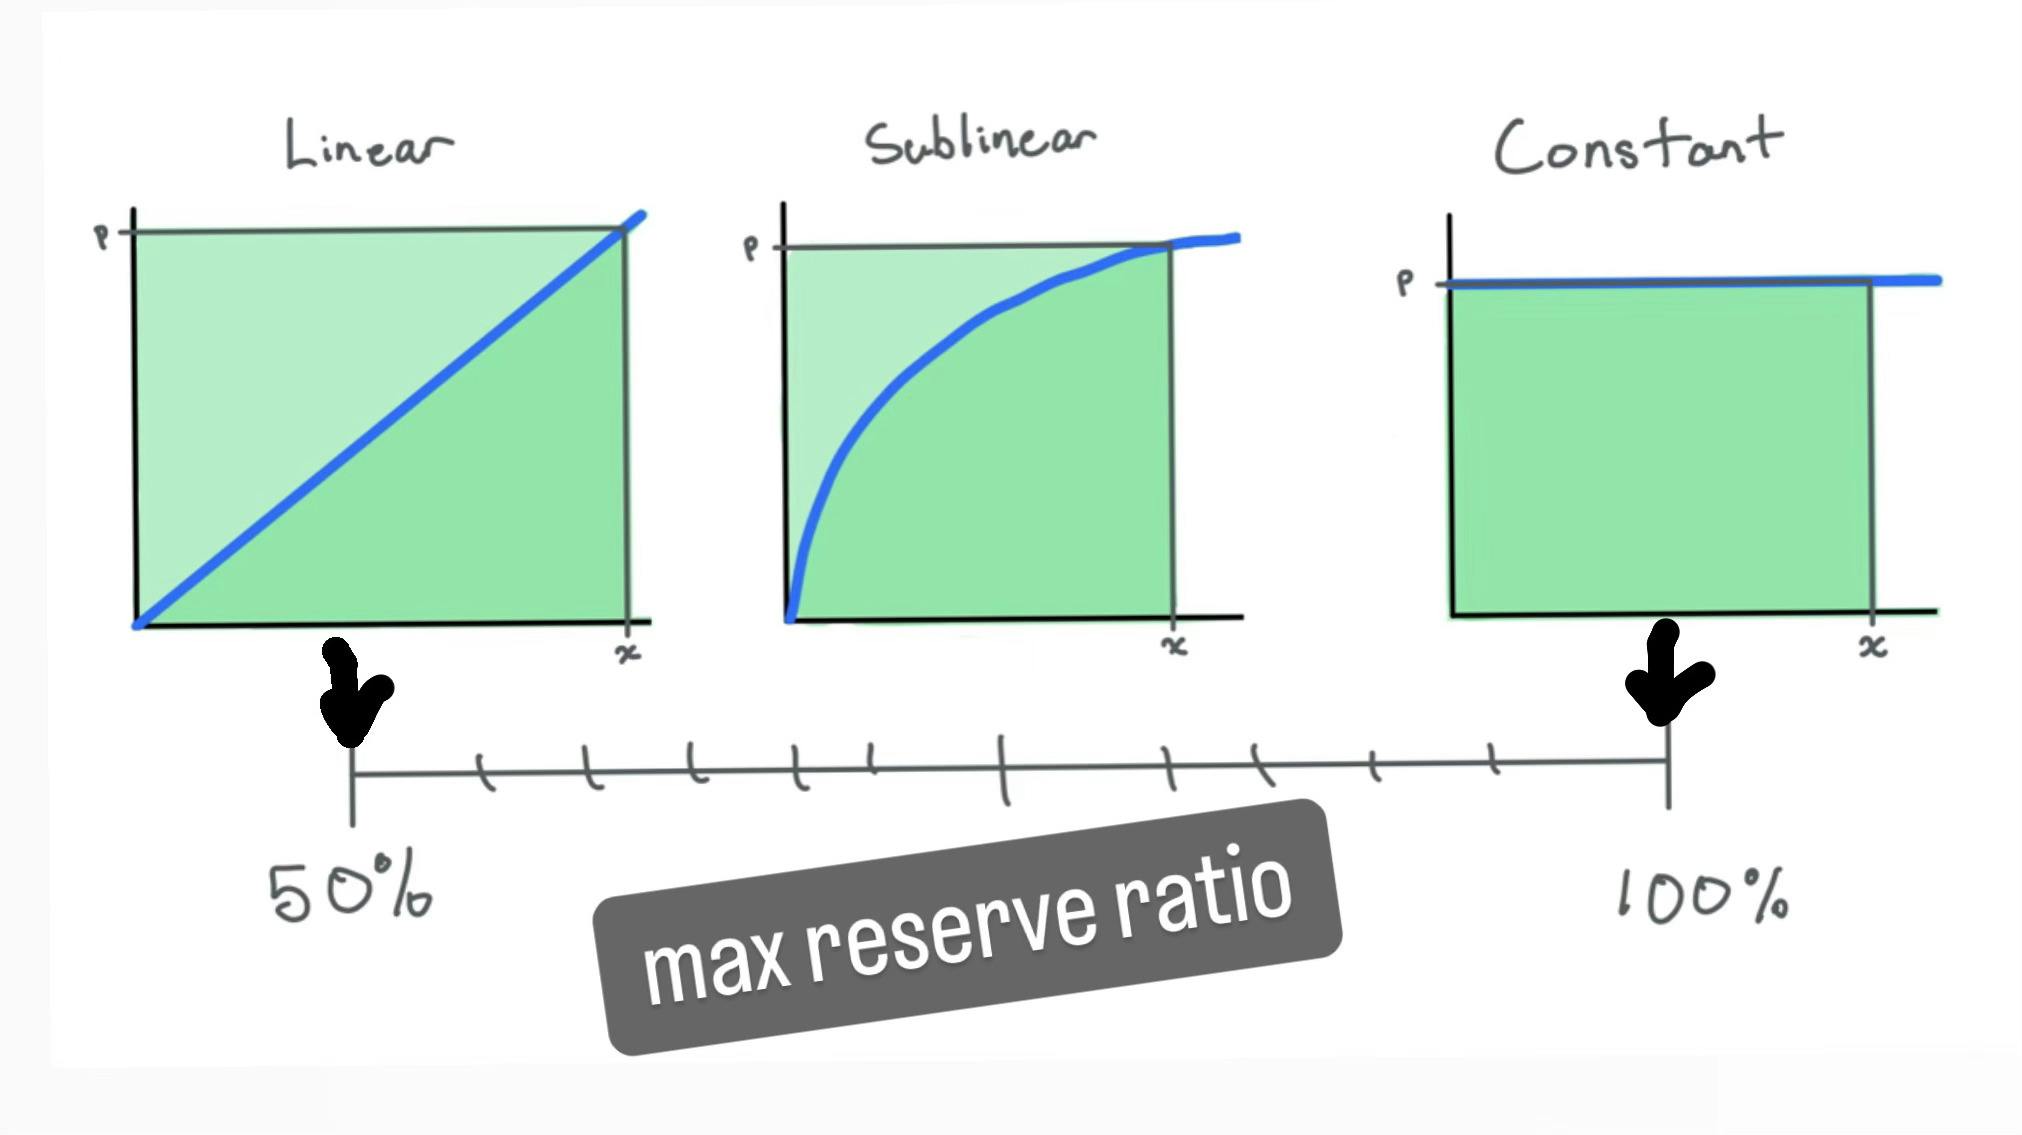 max reserve ratio for sublinear curves fall between 50-100%